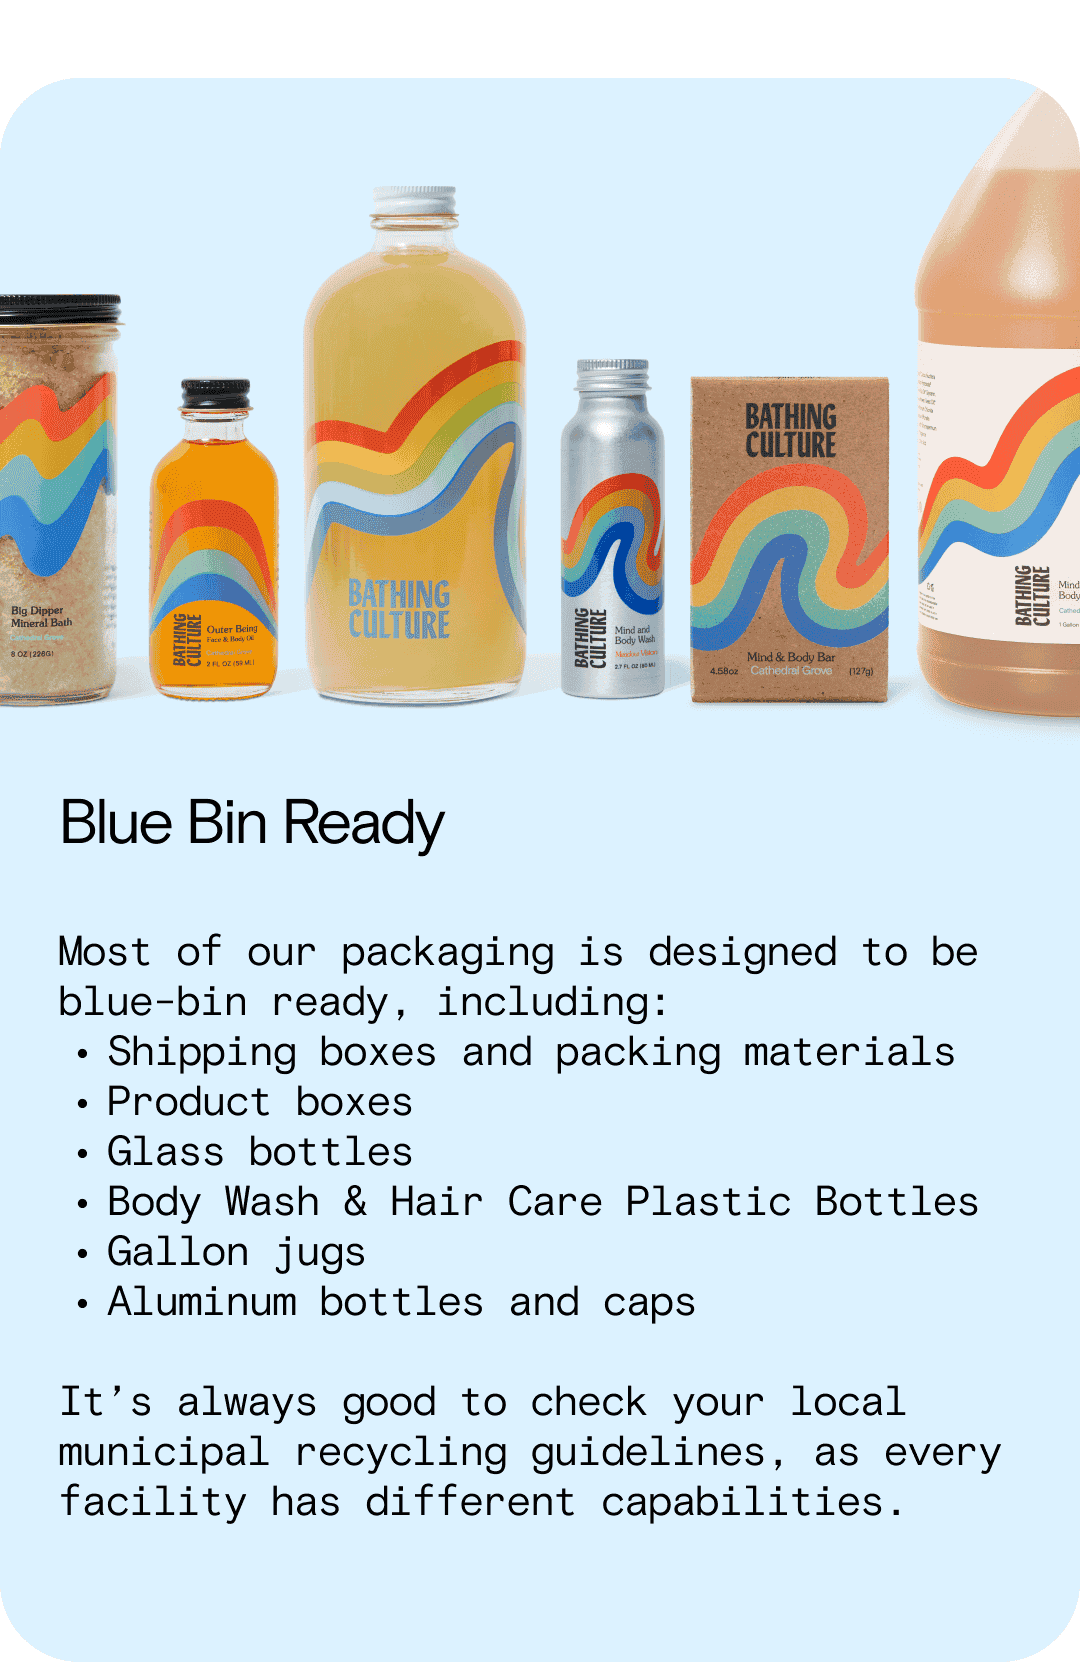 Blue Bin Ready Most of our packaging is designed to be blue-bin ready, including: Shipping boxes and packing materials Product boxes Glass bottles Body Wash & Hair Care Plastic Bottles Gallon jugs Aluminum bottles and caps It’s always good to check your local municipal recycling guidelines, as every facility has different capabilities.